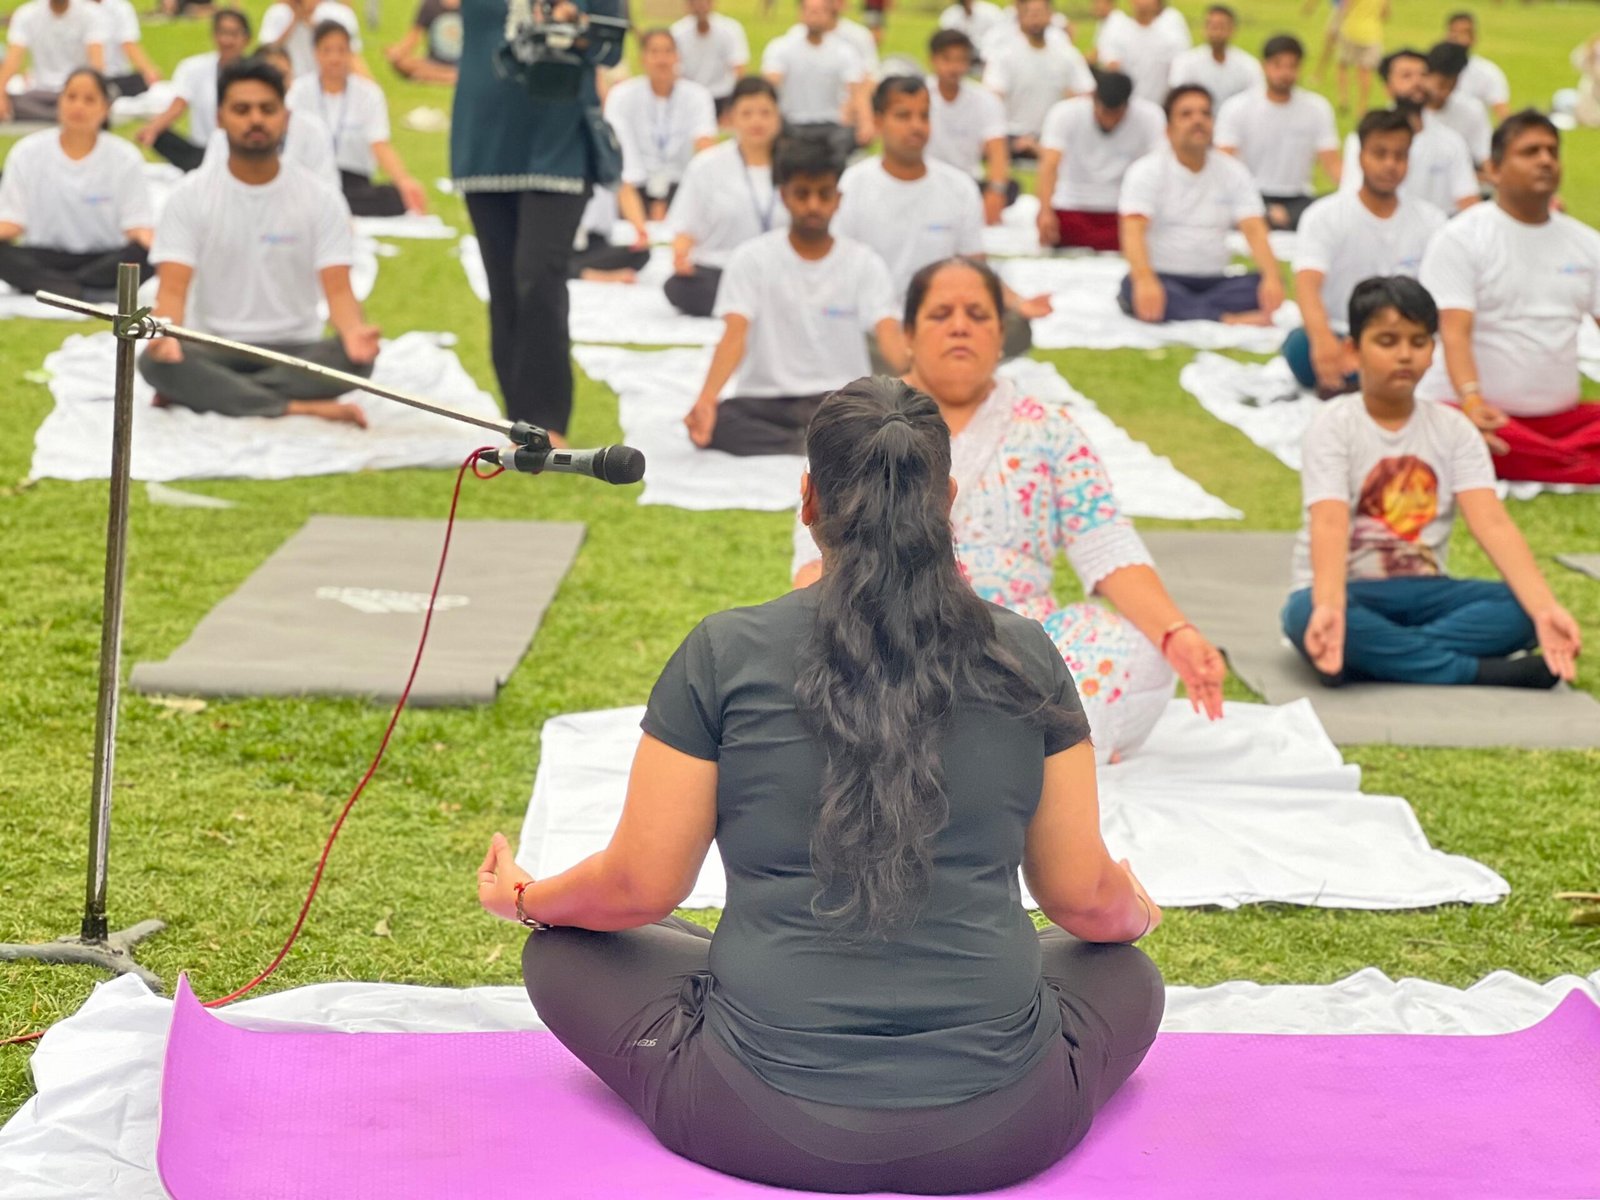 Healing Hands, Peaceful Minds: NKS Super Speciality Hospital Observes International Yoga Day with Health Checkup